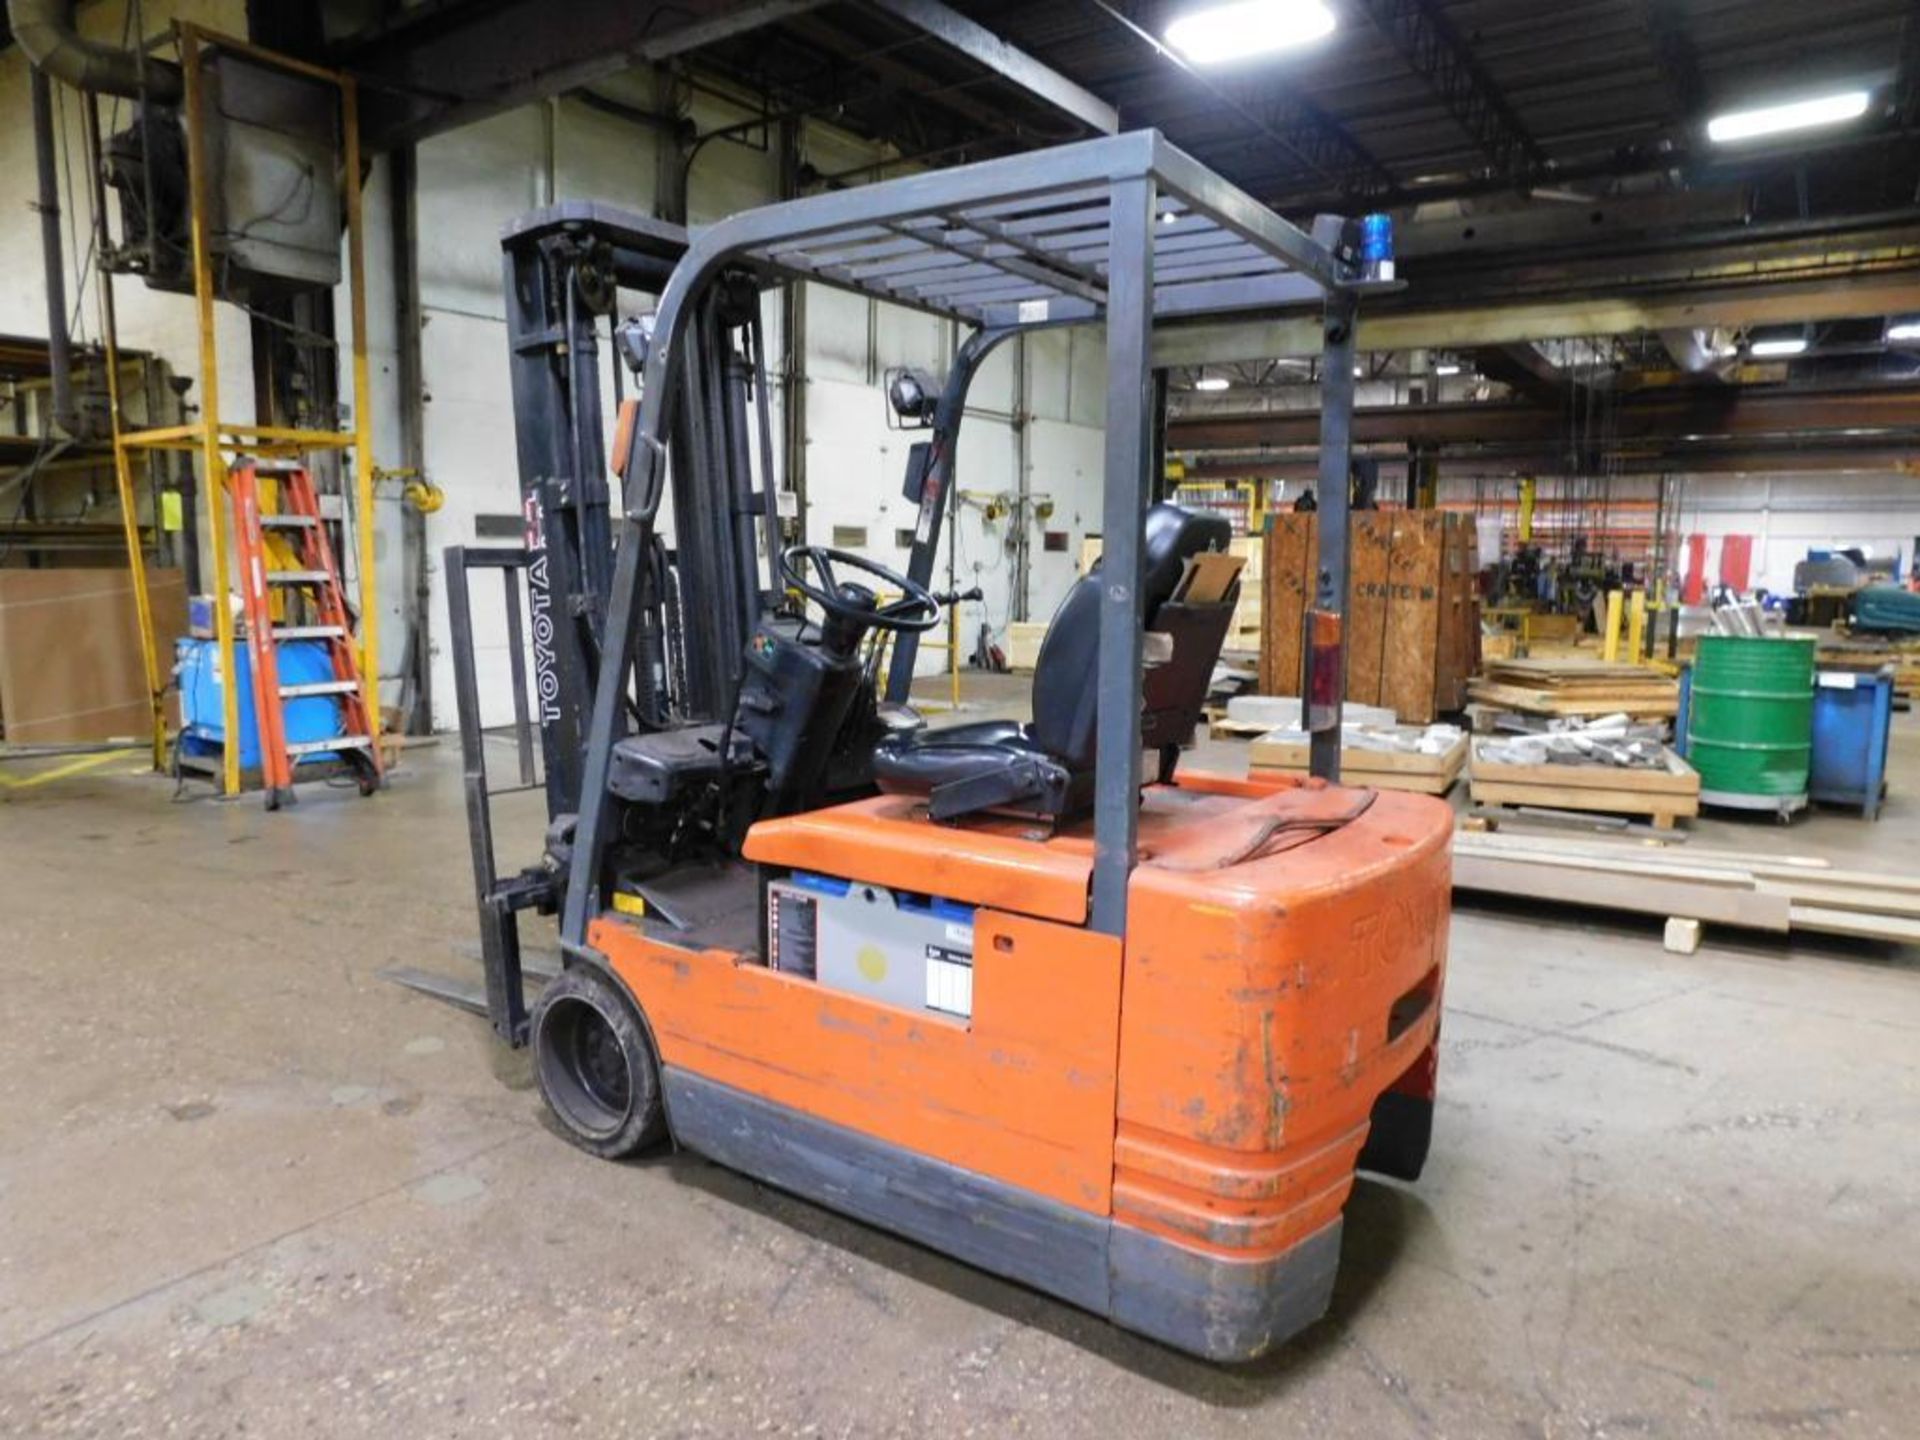 Toyota 3,450 Lb. Electric Forklift Model 5FBE20, S/N 10222, Solid Tires, 189" Max Lift Height, 3-Sta - Image 2 of 17